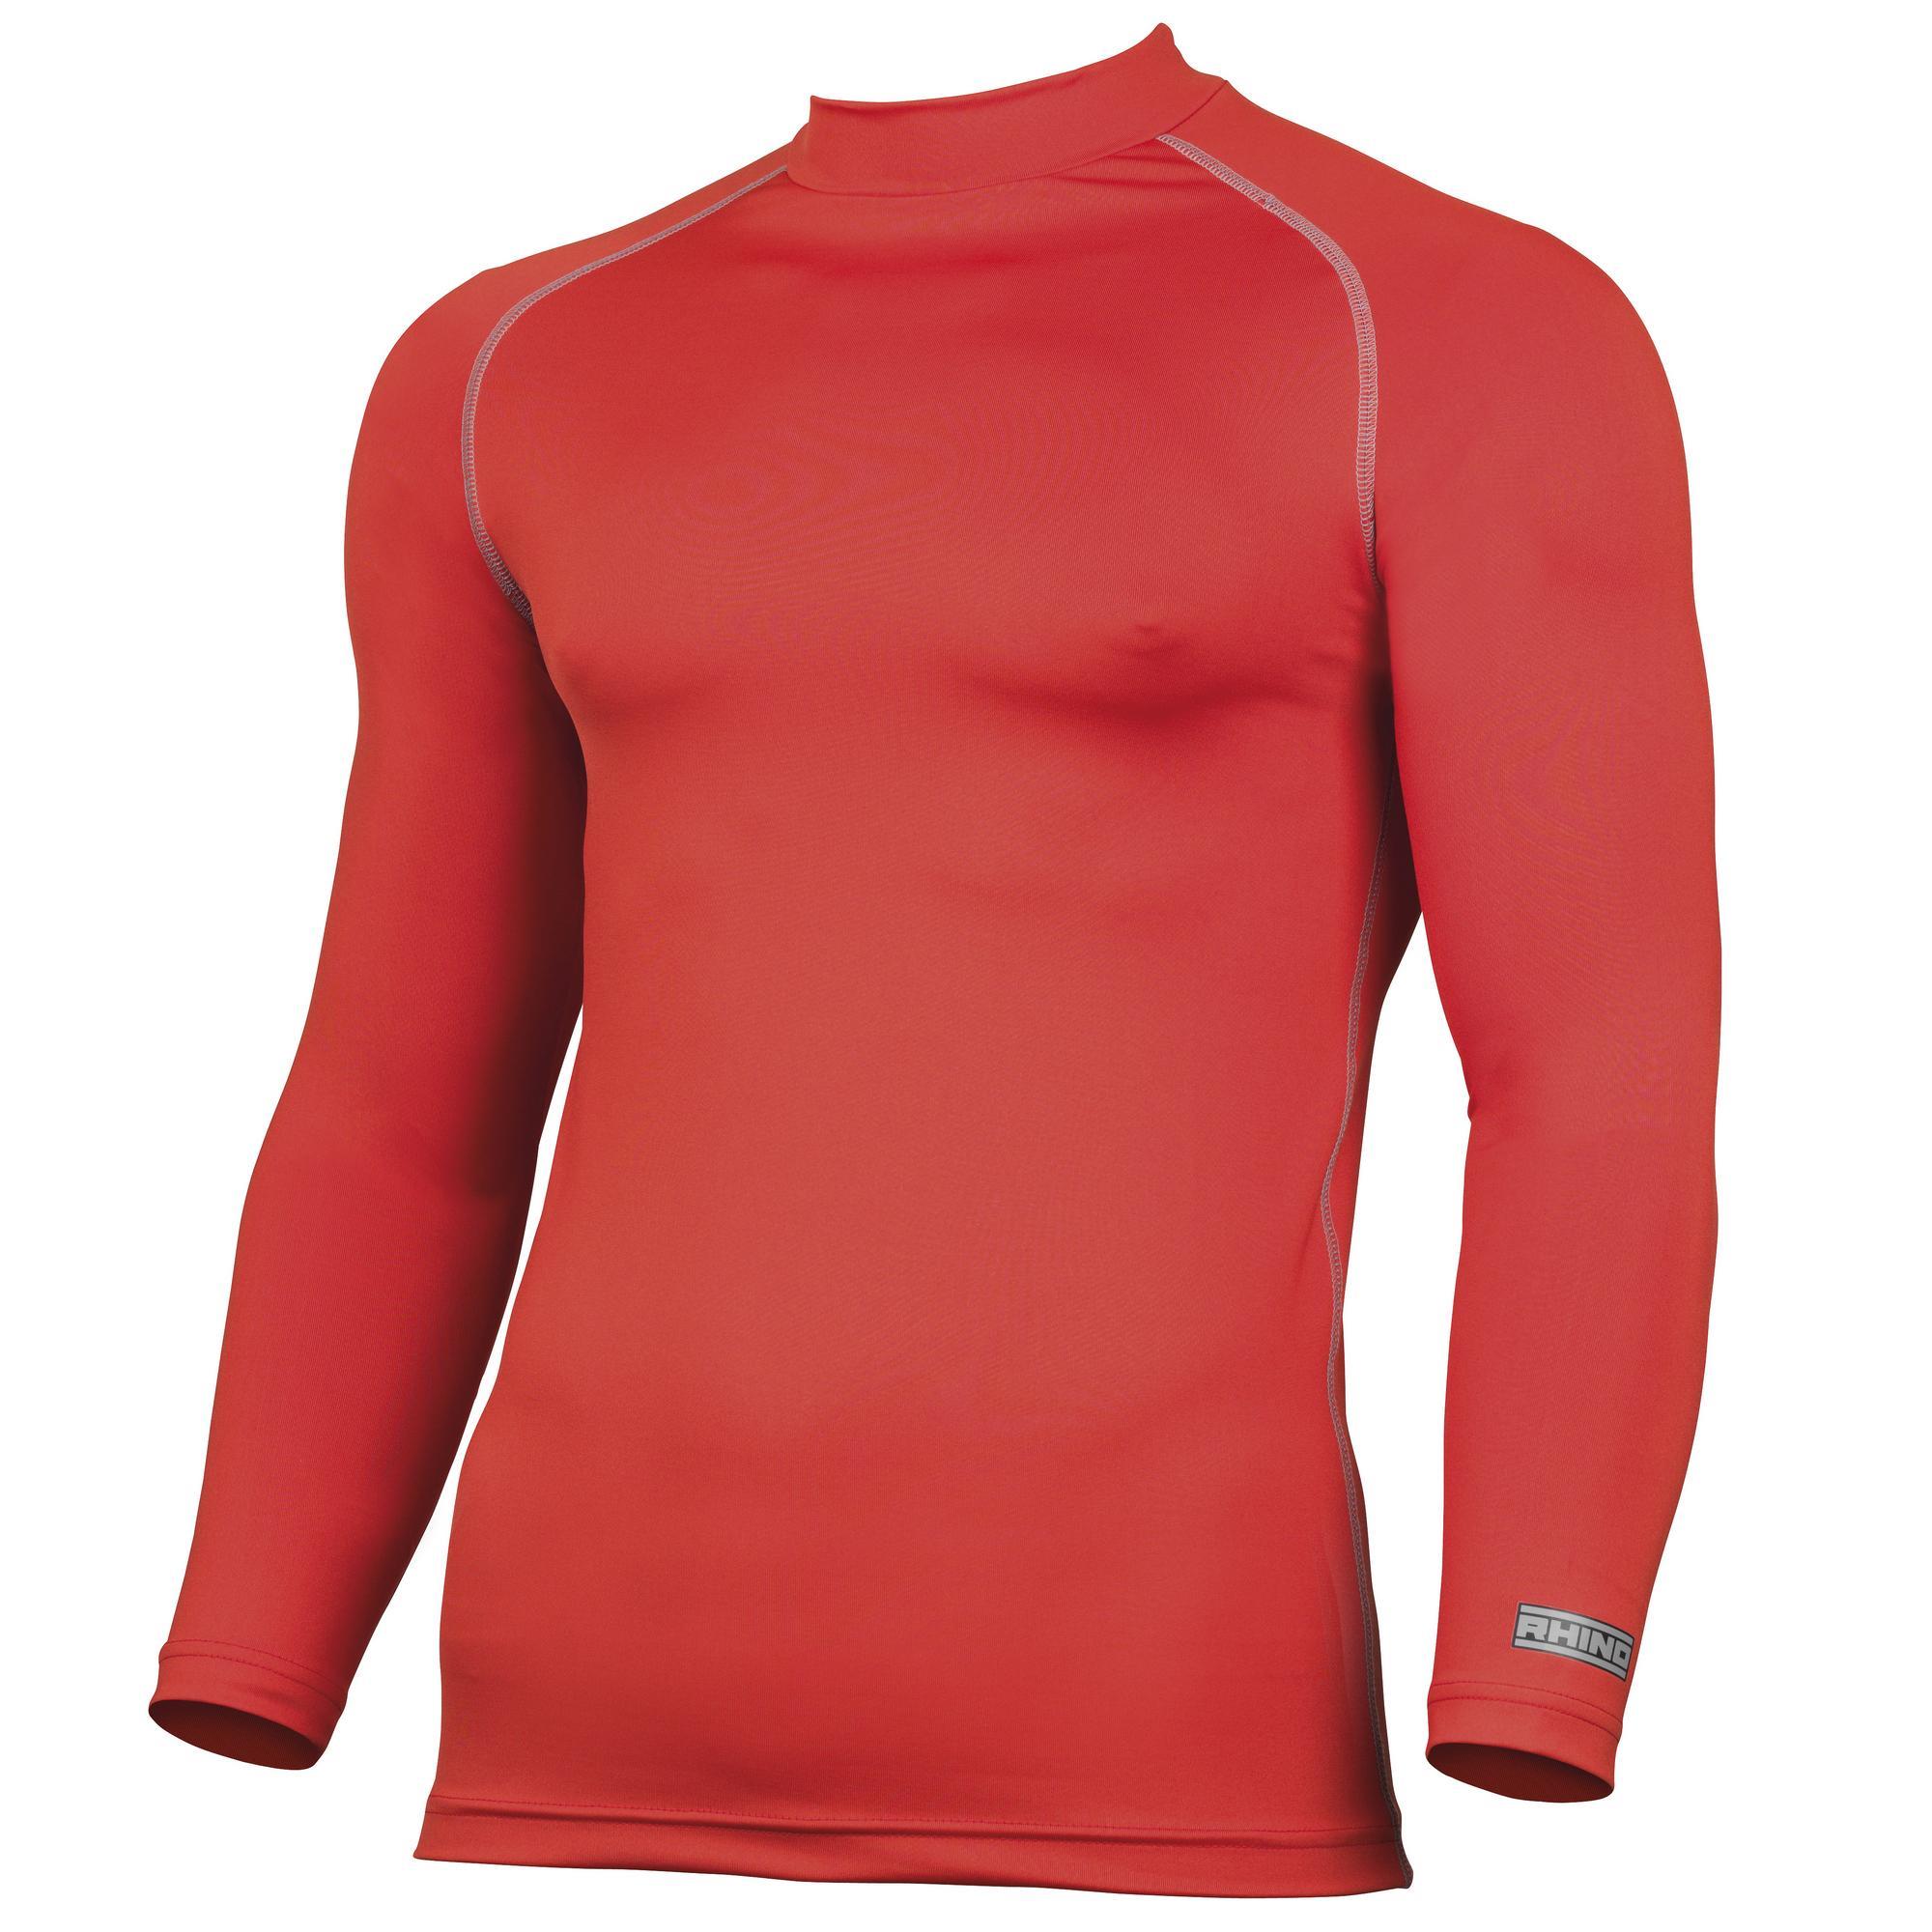 Rhino Mens Thermal Underwear Long Sleeve Base Layer Vest Top (Red) (L/XL)